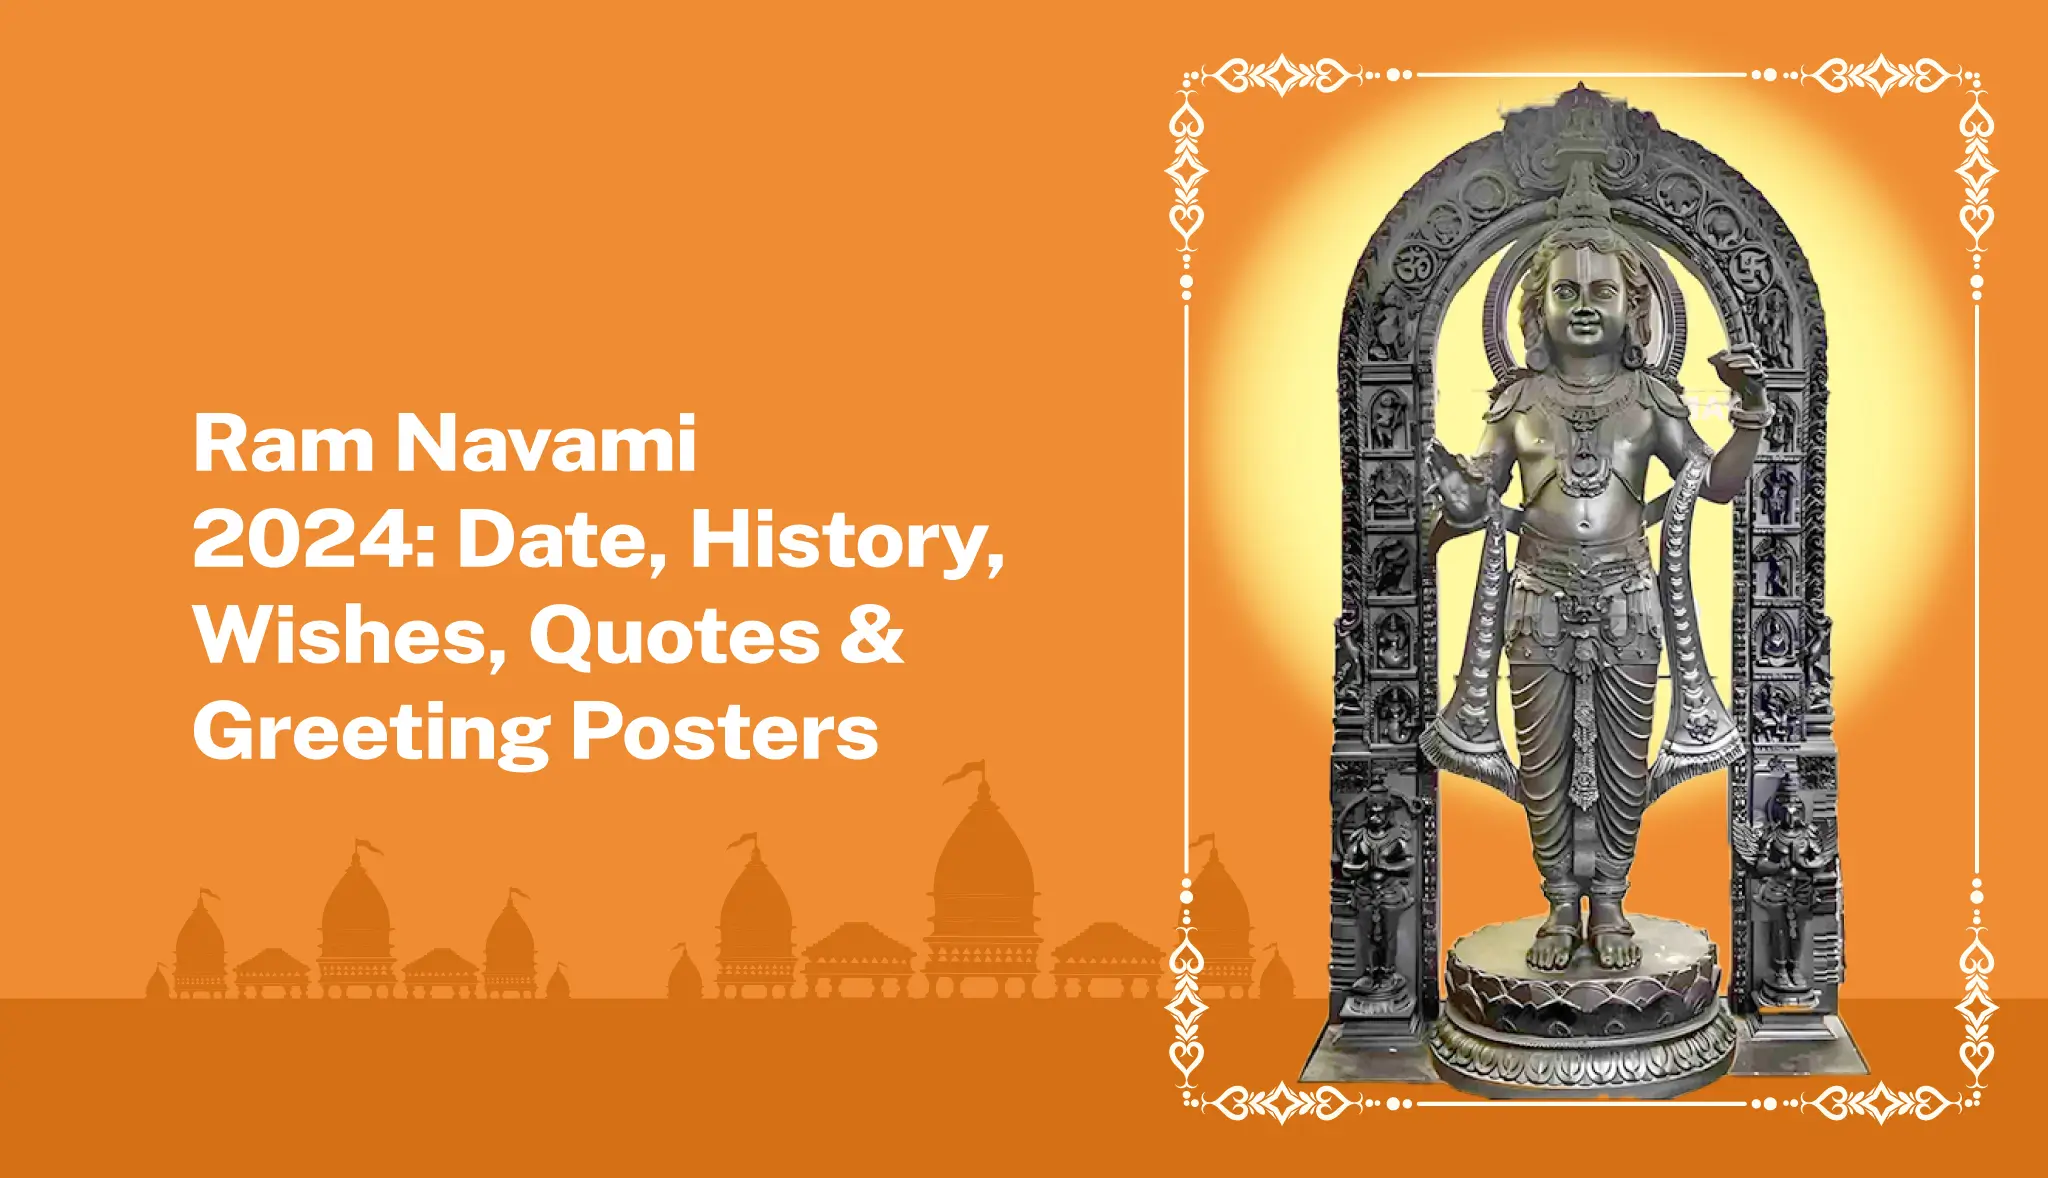 Ram Navami 2024: Date, History, Wishes, Quotes & Posters - Postive